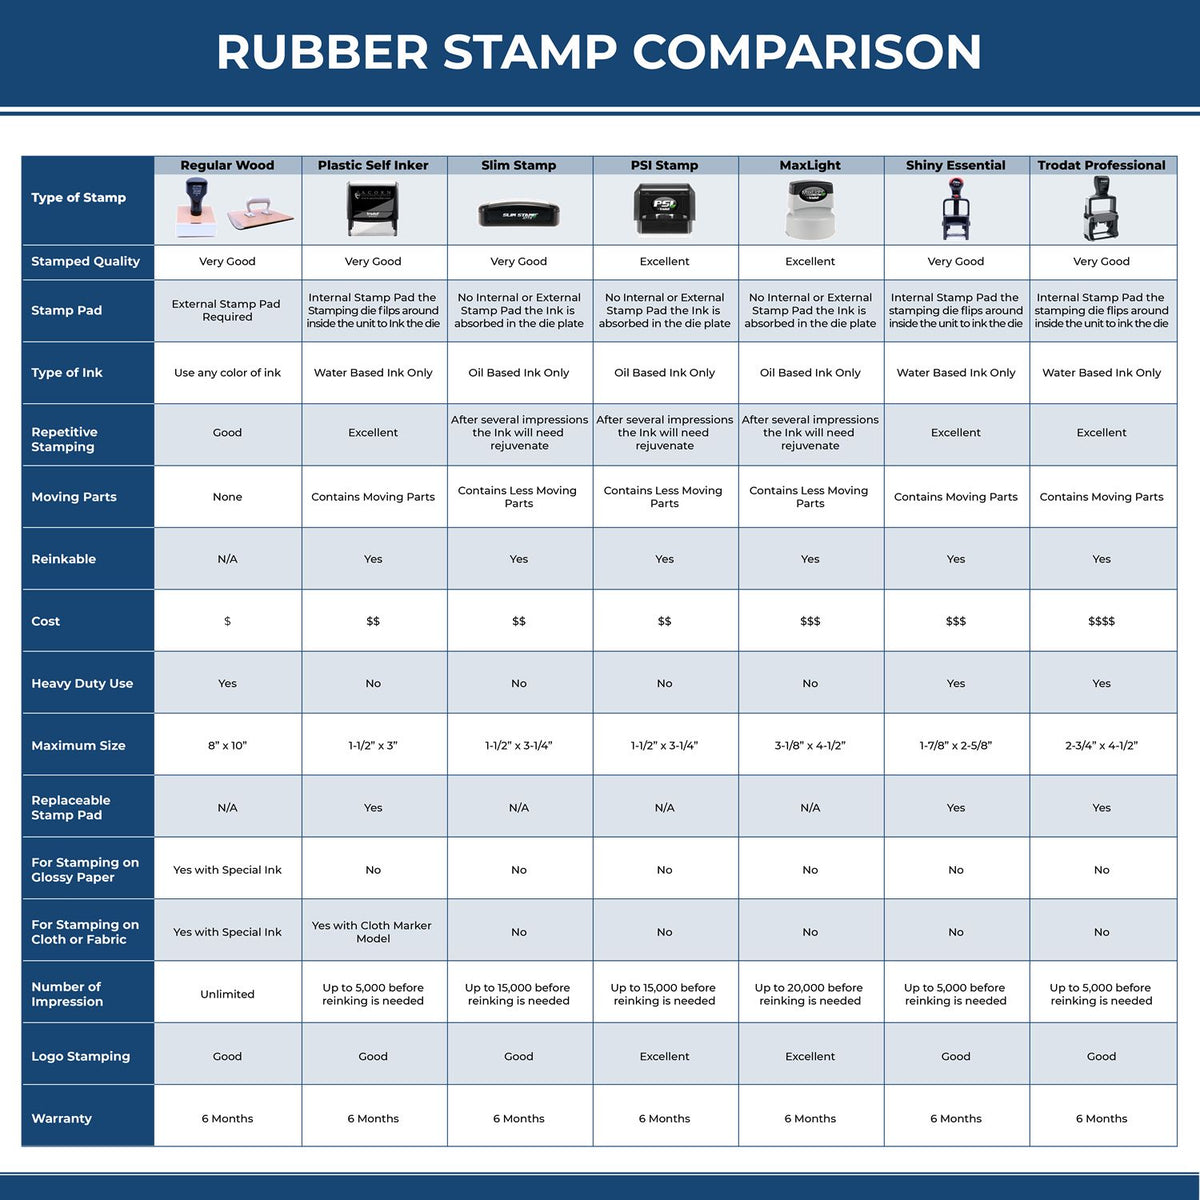 Large Self-Inking Surface Stamp 5563S Rubber Stamp Comparison